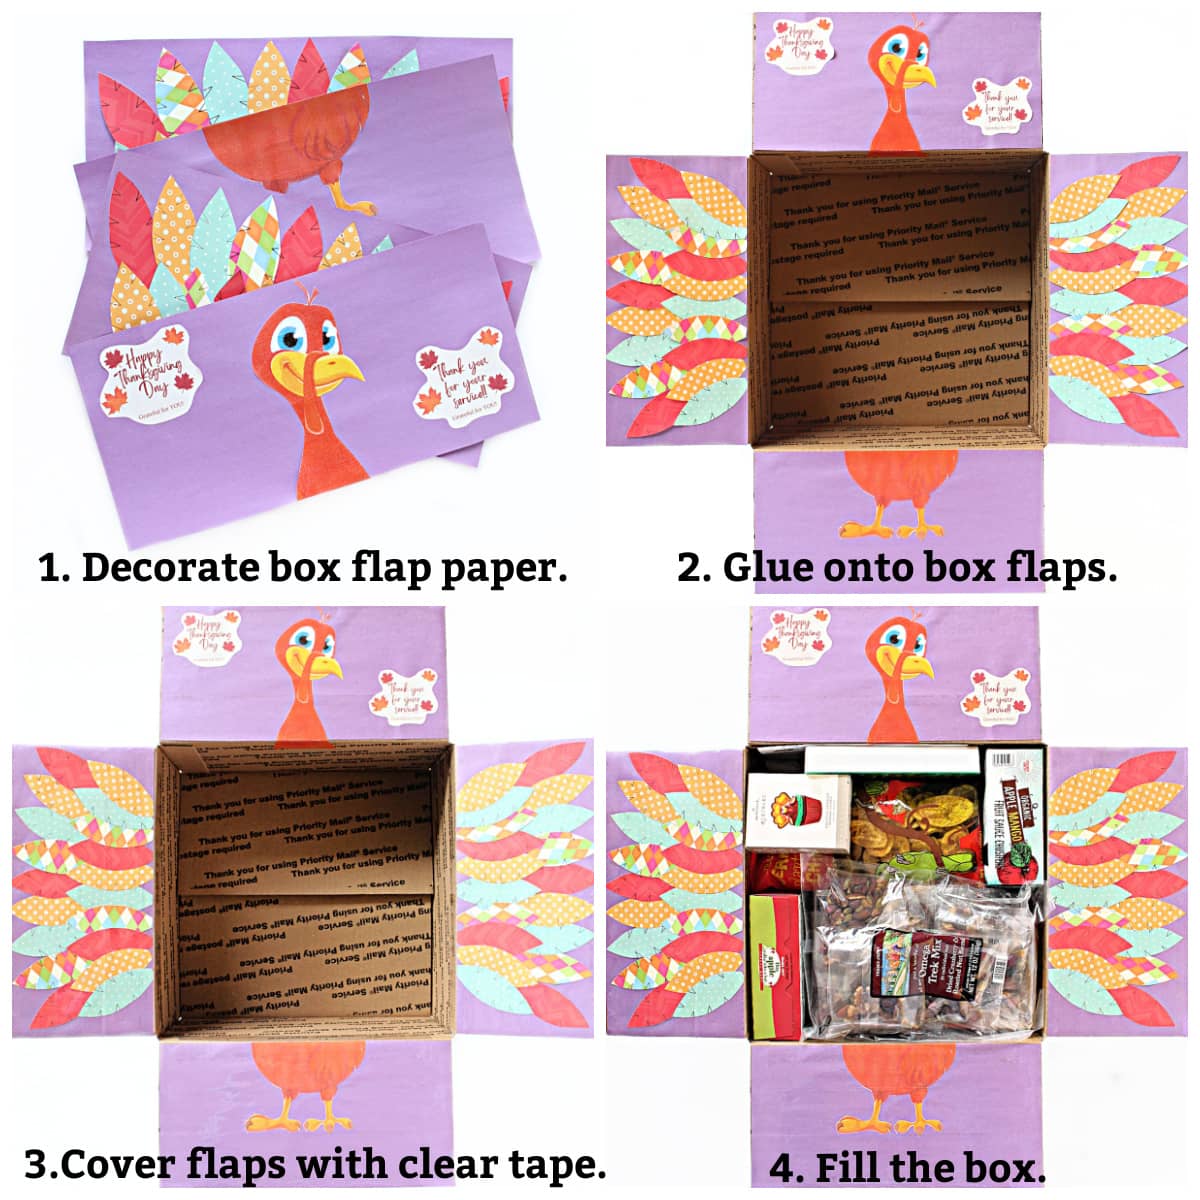 Instructions: decorate box flap papers, glue onto box flaps, cover flaps with clear tape, fill box.